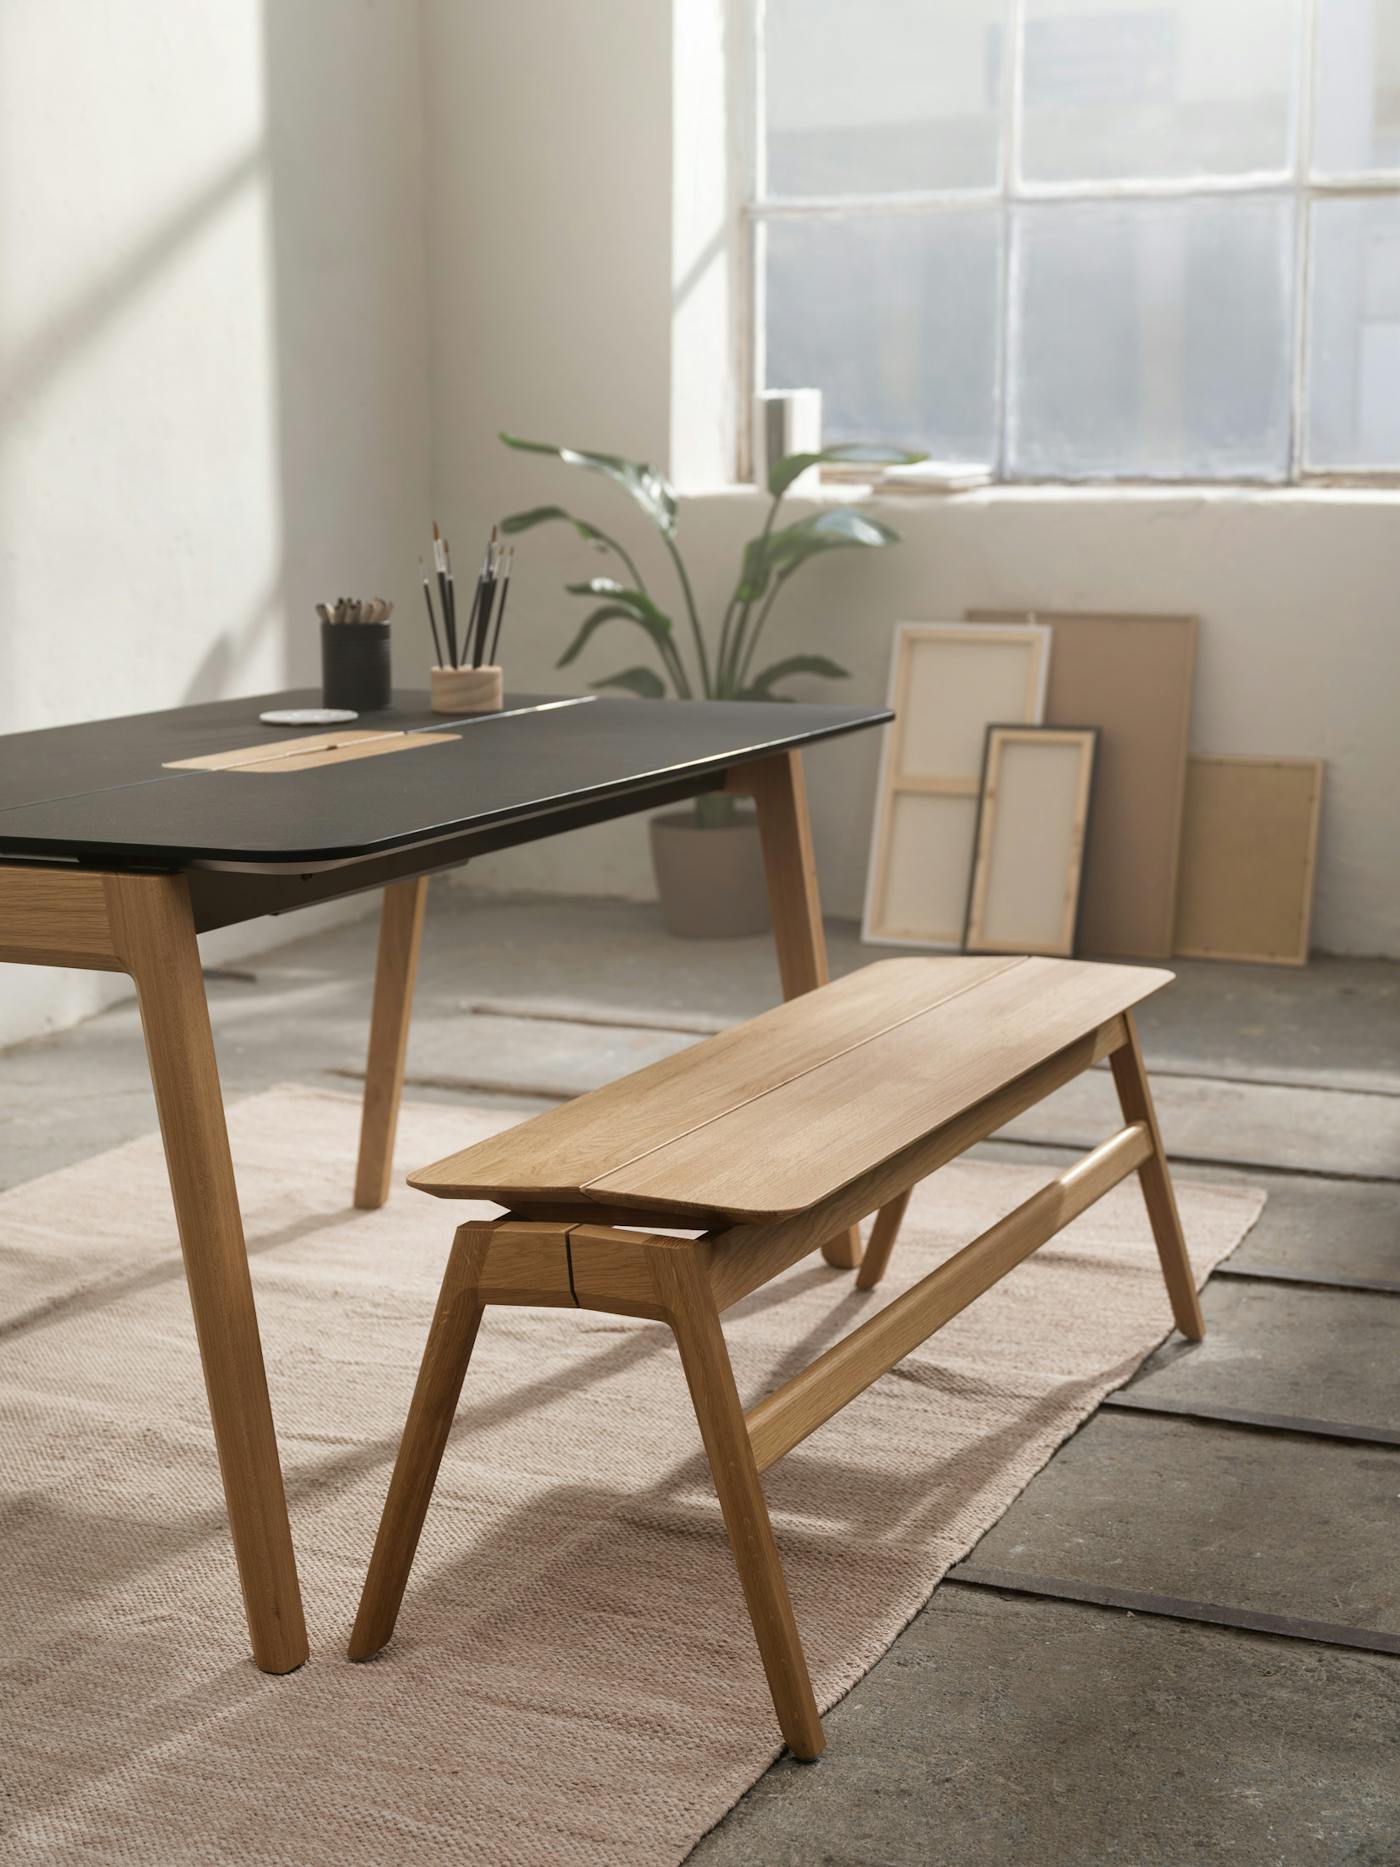 Knekk bench and Knekk wood table from Fora Form